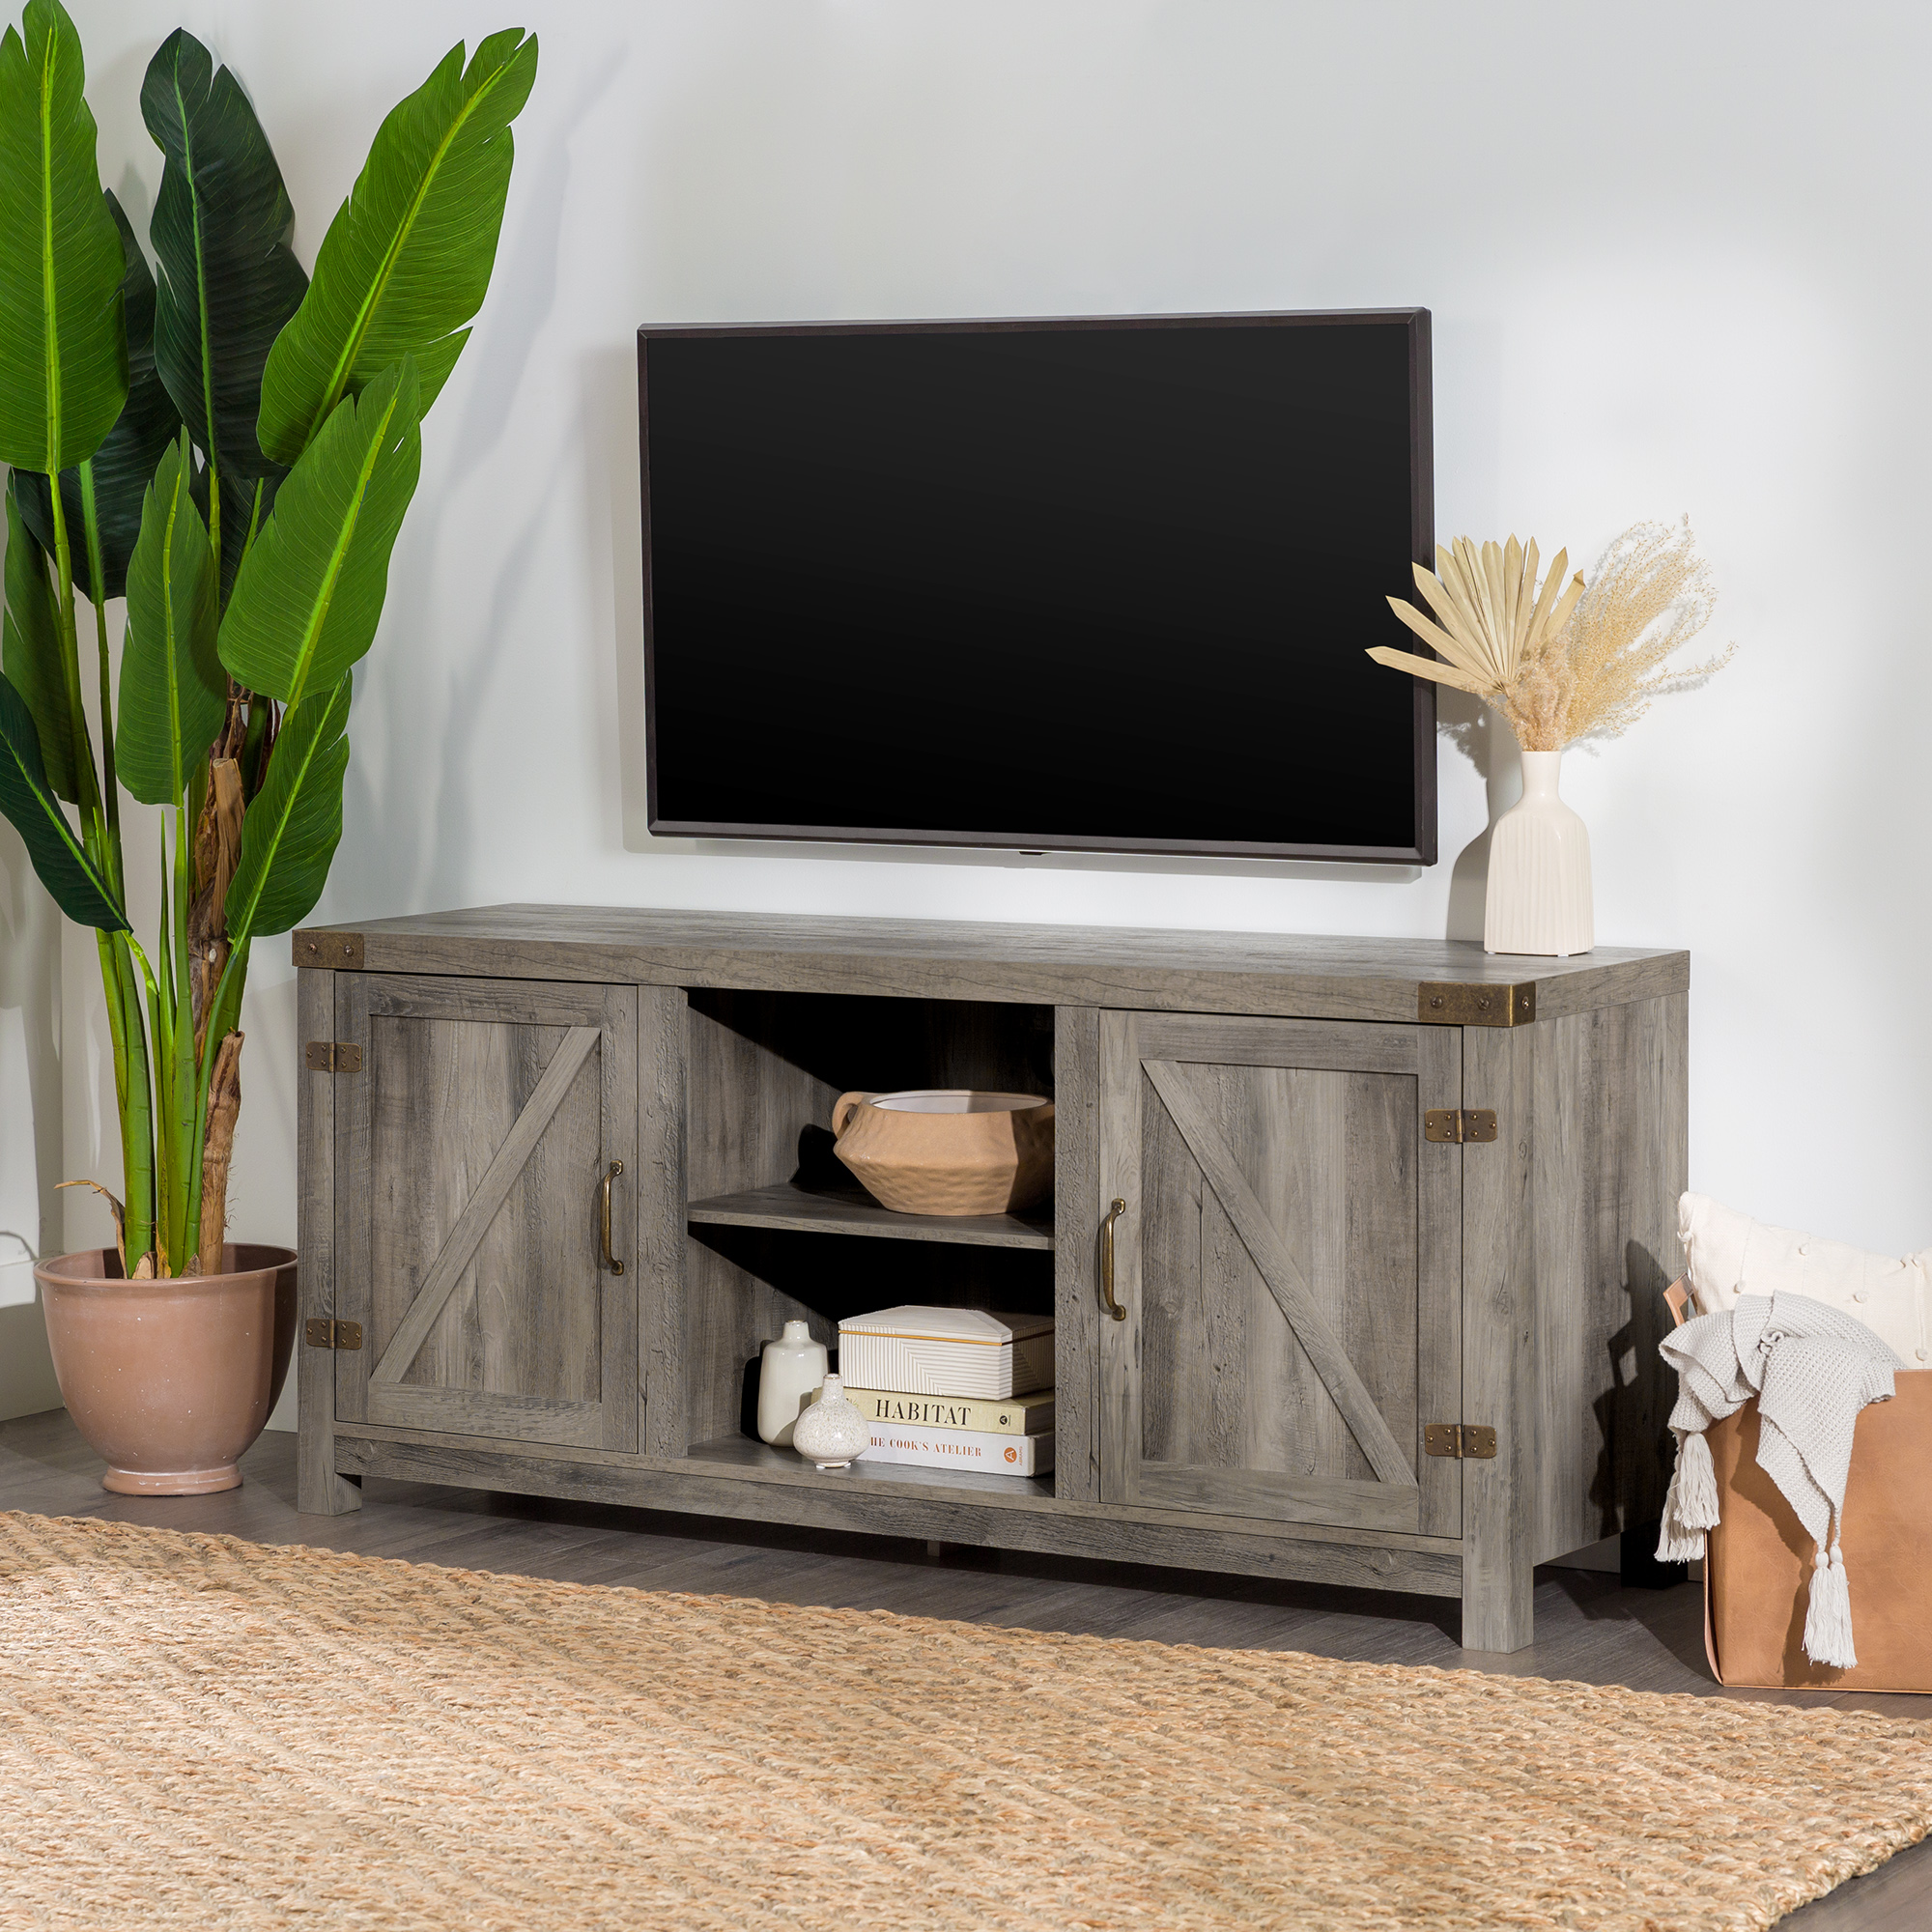 Walker Edison Modern Farmhouse Barn Door TV Stand for TVs up to 65", Grey Wash - image 1 of 22